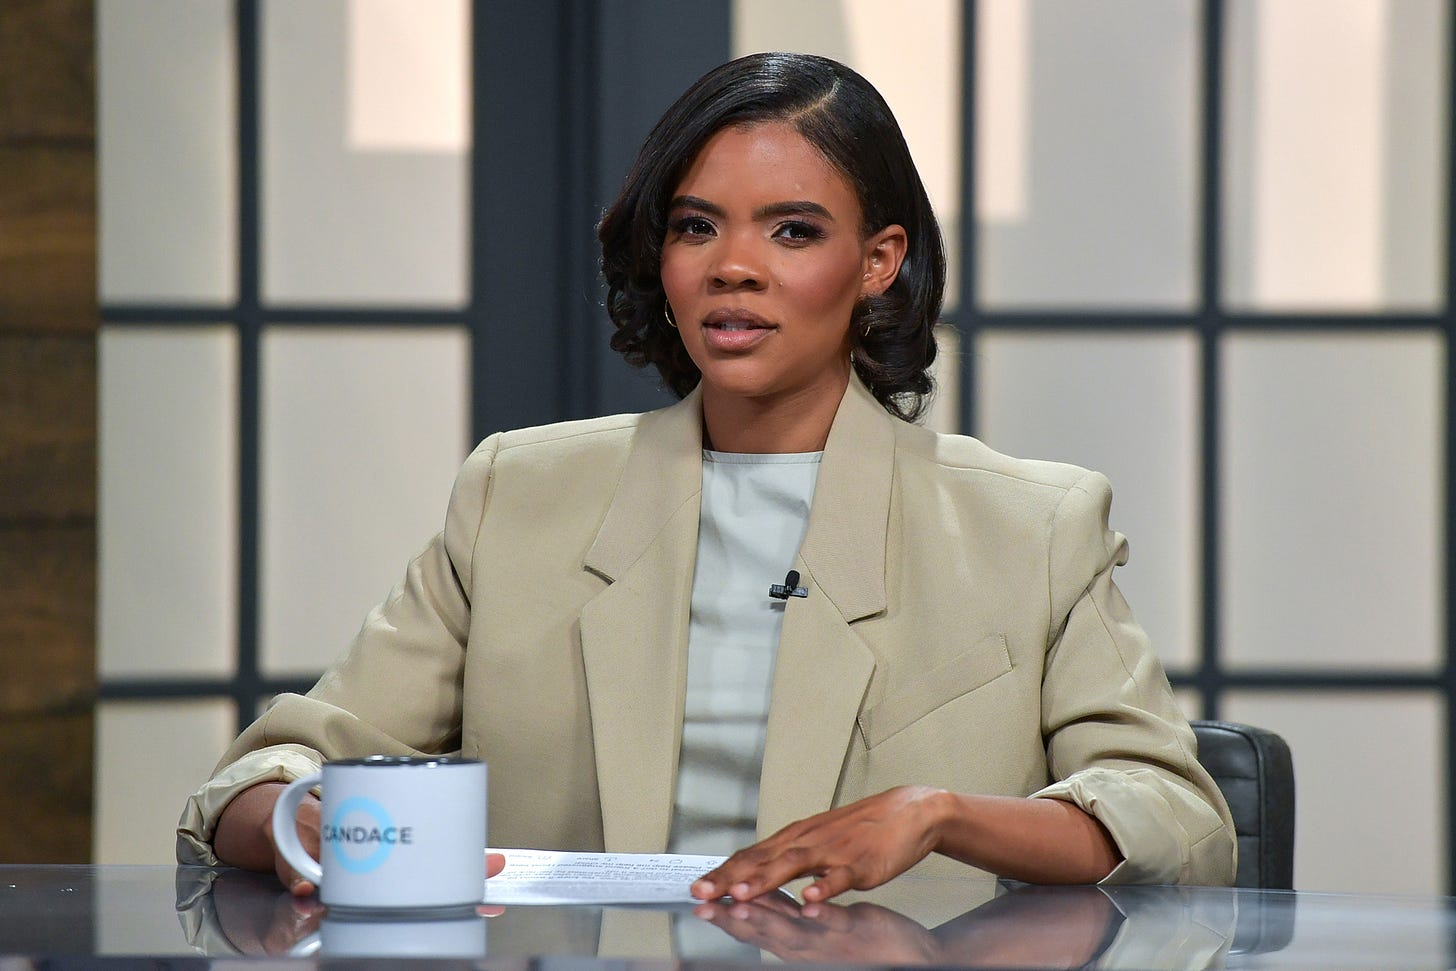 Candace Owens Out at Daily Wire Following Antisemitic Comments